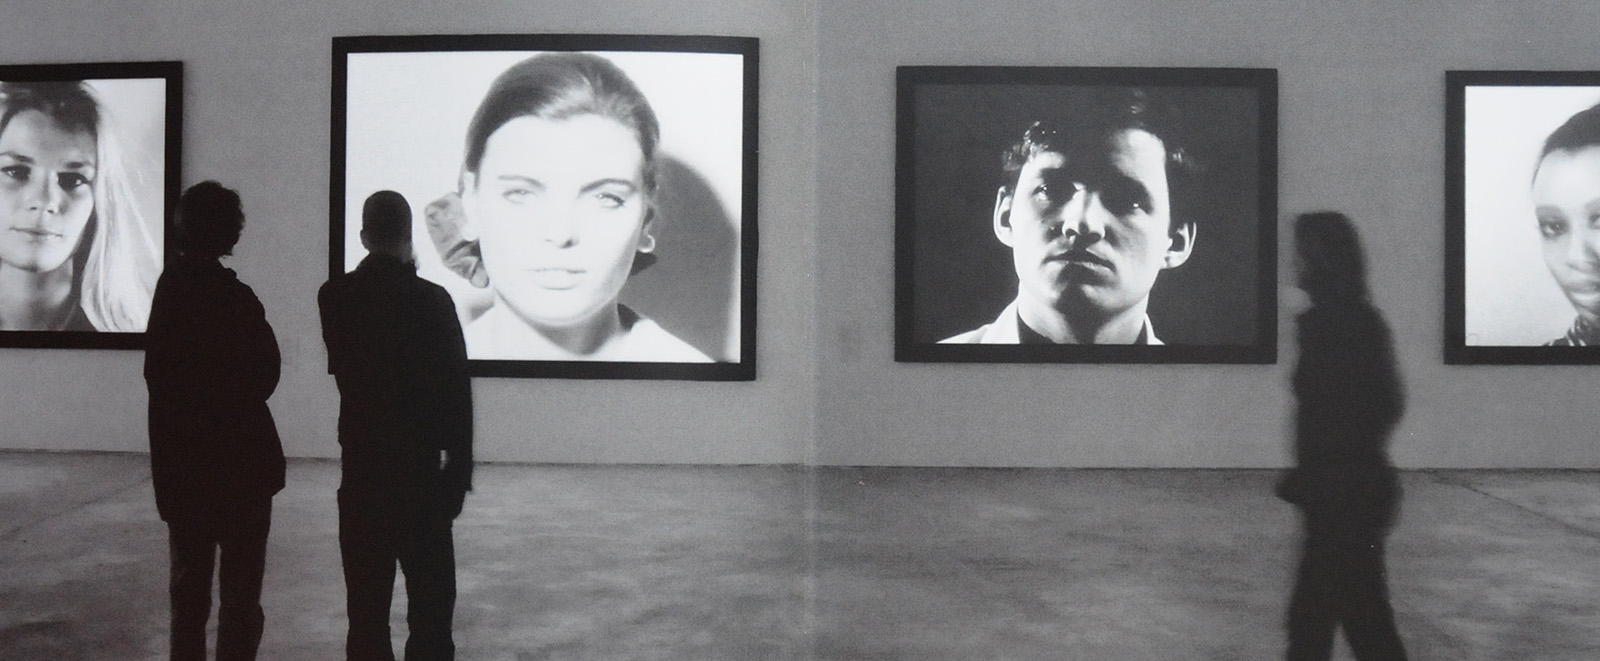 black-and-white photo, installation view of Andy Warhol: Motion Pictures, KW ICA, Berlin, 2004